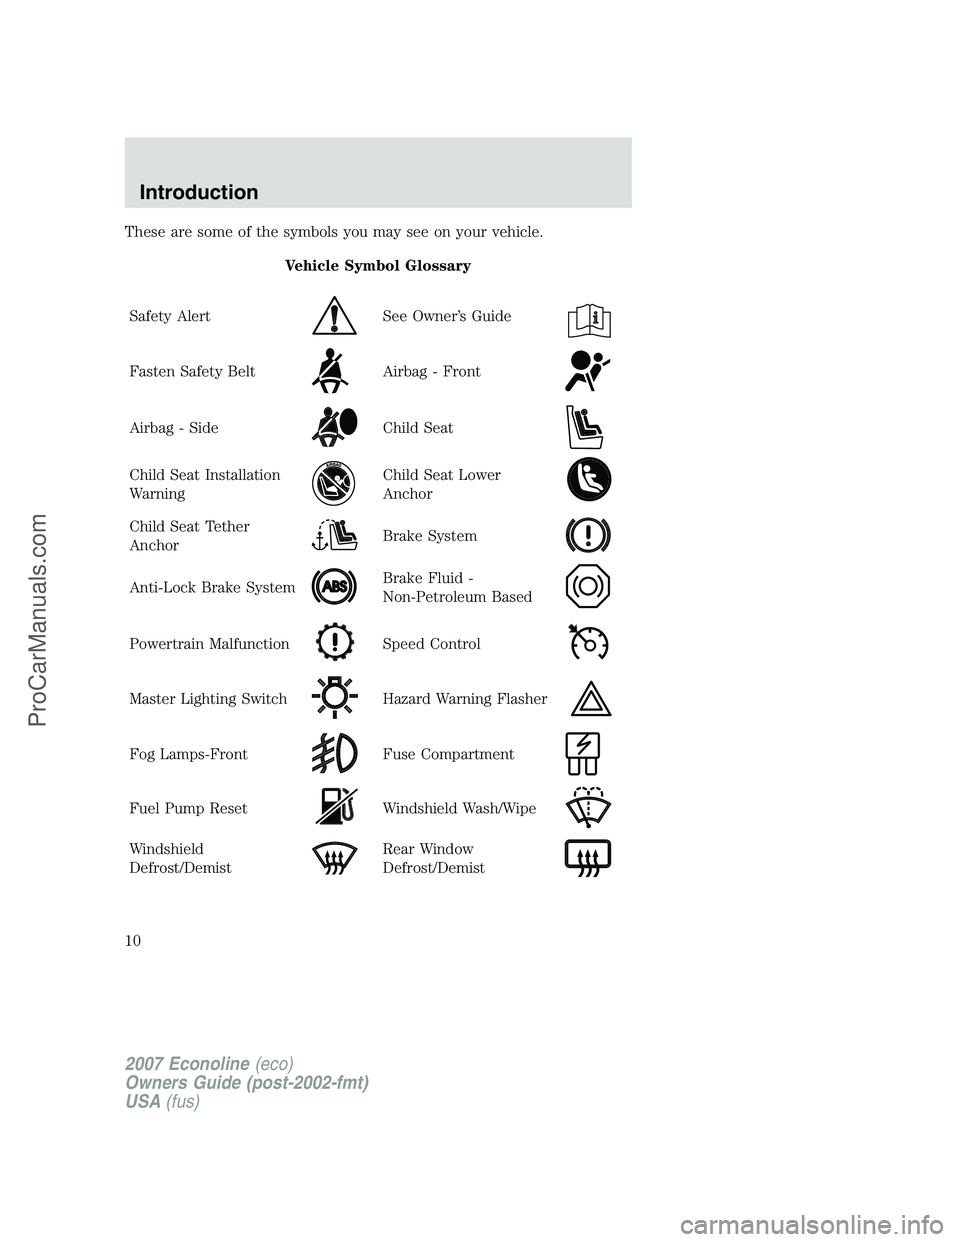 FORD ECONOLINE 2007  Owners Manual These are some of the symbols you may see on your vehicle.
Vehicle Symbol Glossary
Safety Alert
See Owner’s Guide
Fasten Safety BeltAirbag - Front
Airbag - SideChild Seat
Child Seat Installation
War